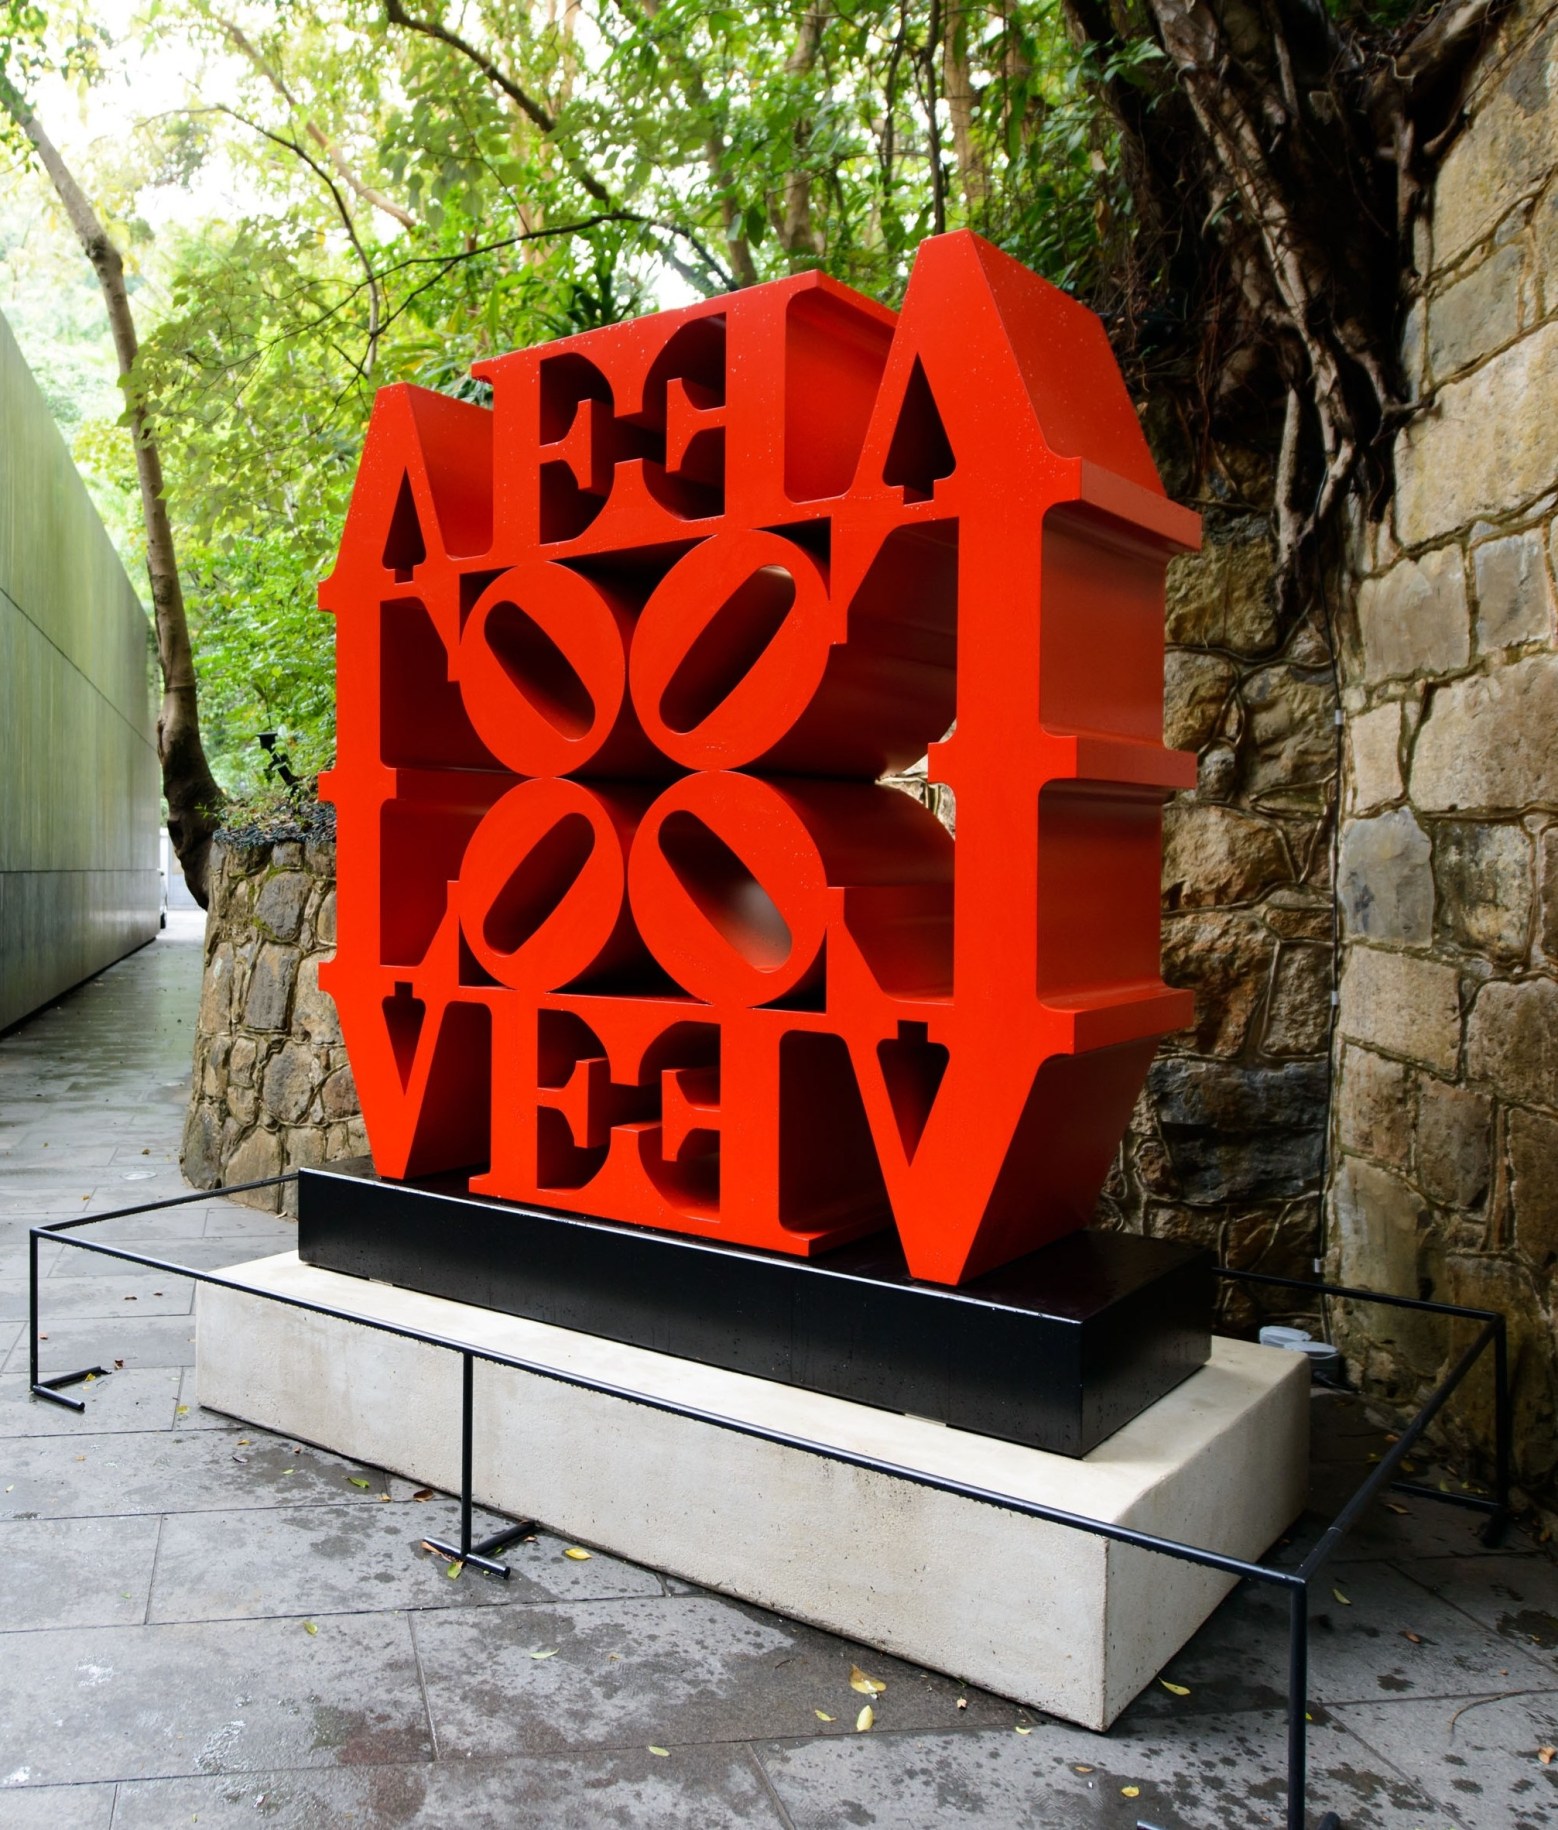 LOVE Wall is a 72 by 72 by 24 inch red polychrome aluminum sculpture consisting of four LOVEs, each with the letters L and a tilted O above the letters V and E. , Two of the LOVEs are upright and two inverted, all facing inward with the four &ldquo;O&rdquo;s meeting in the center.